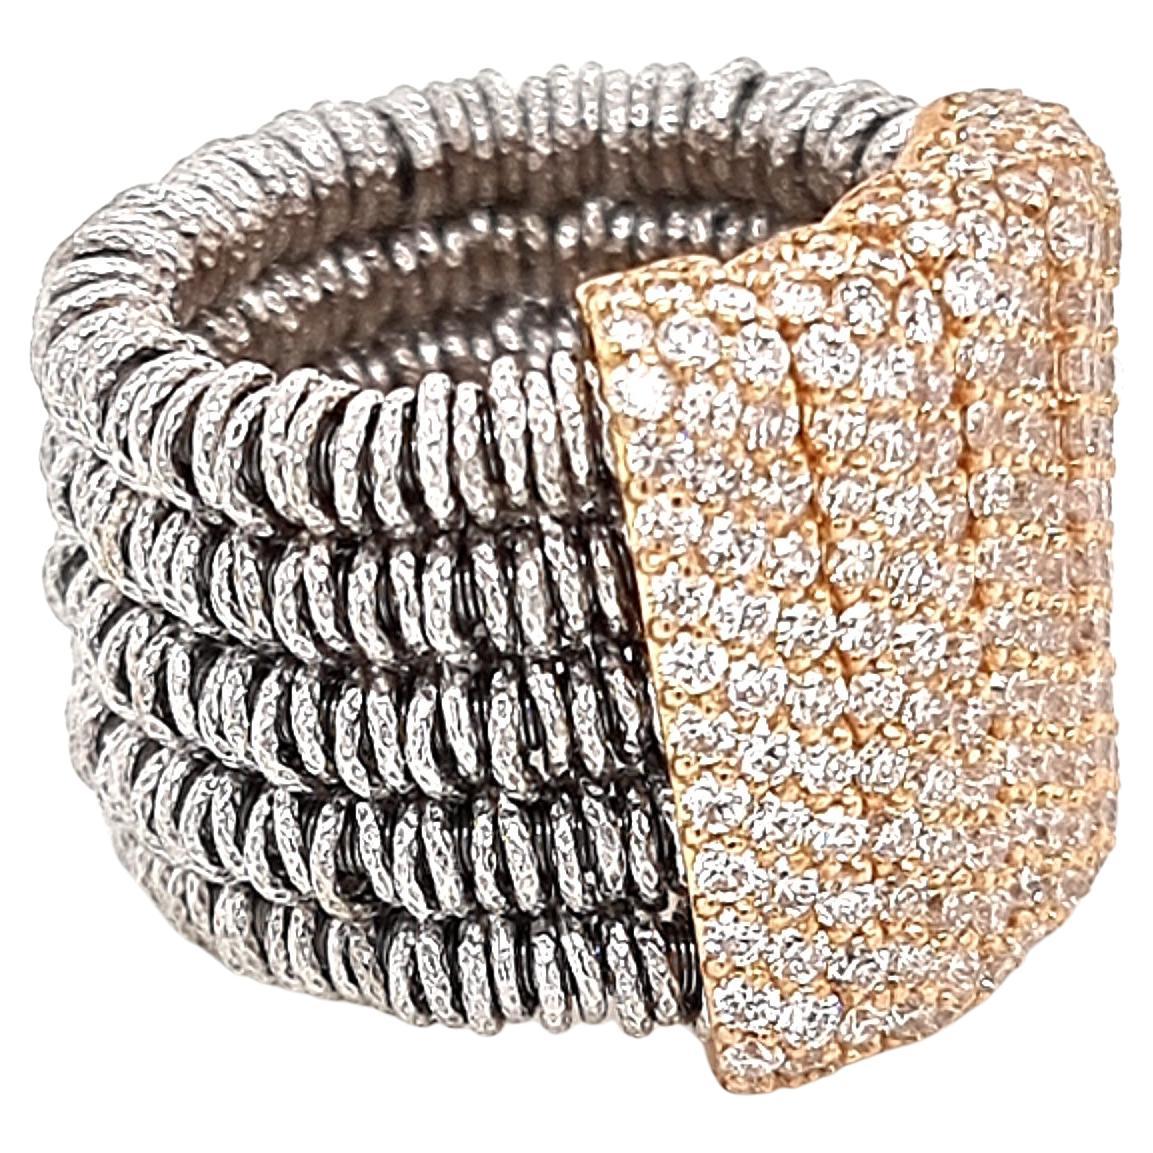 Steel Ring with 18k Gold Elements Encrusted with Diamonds by Roberto Demeglio